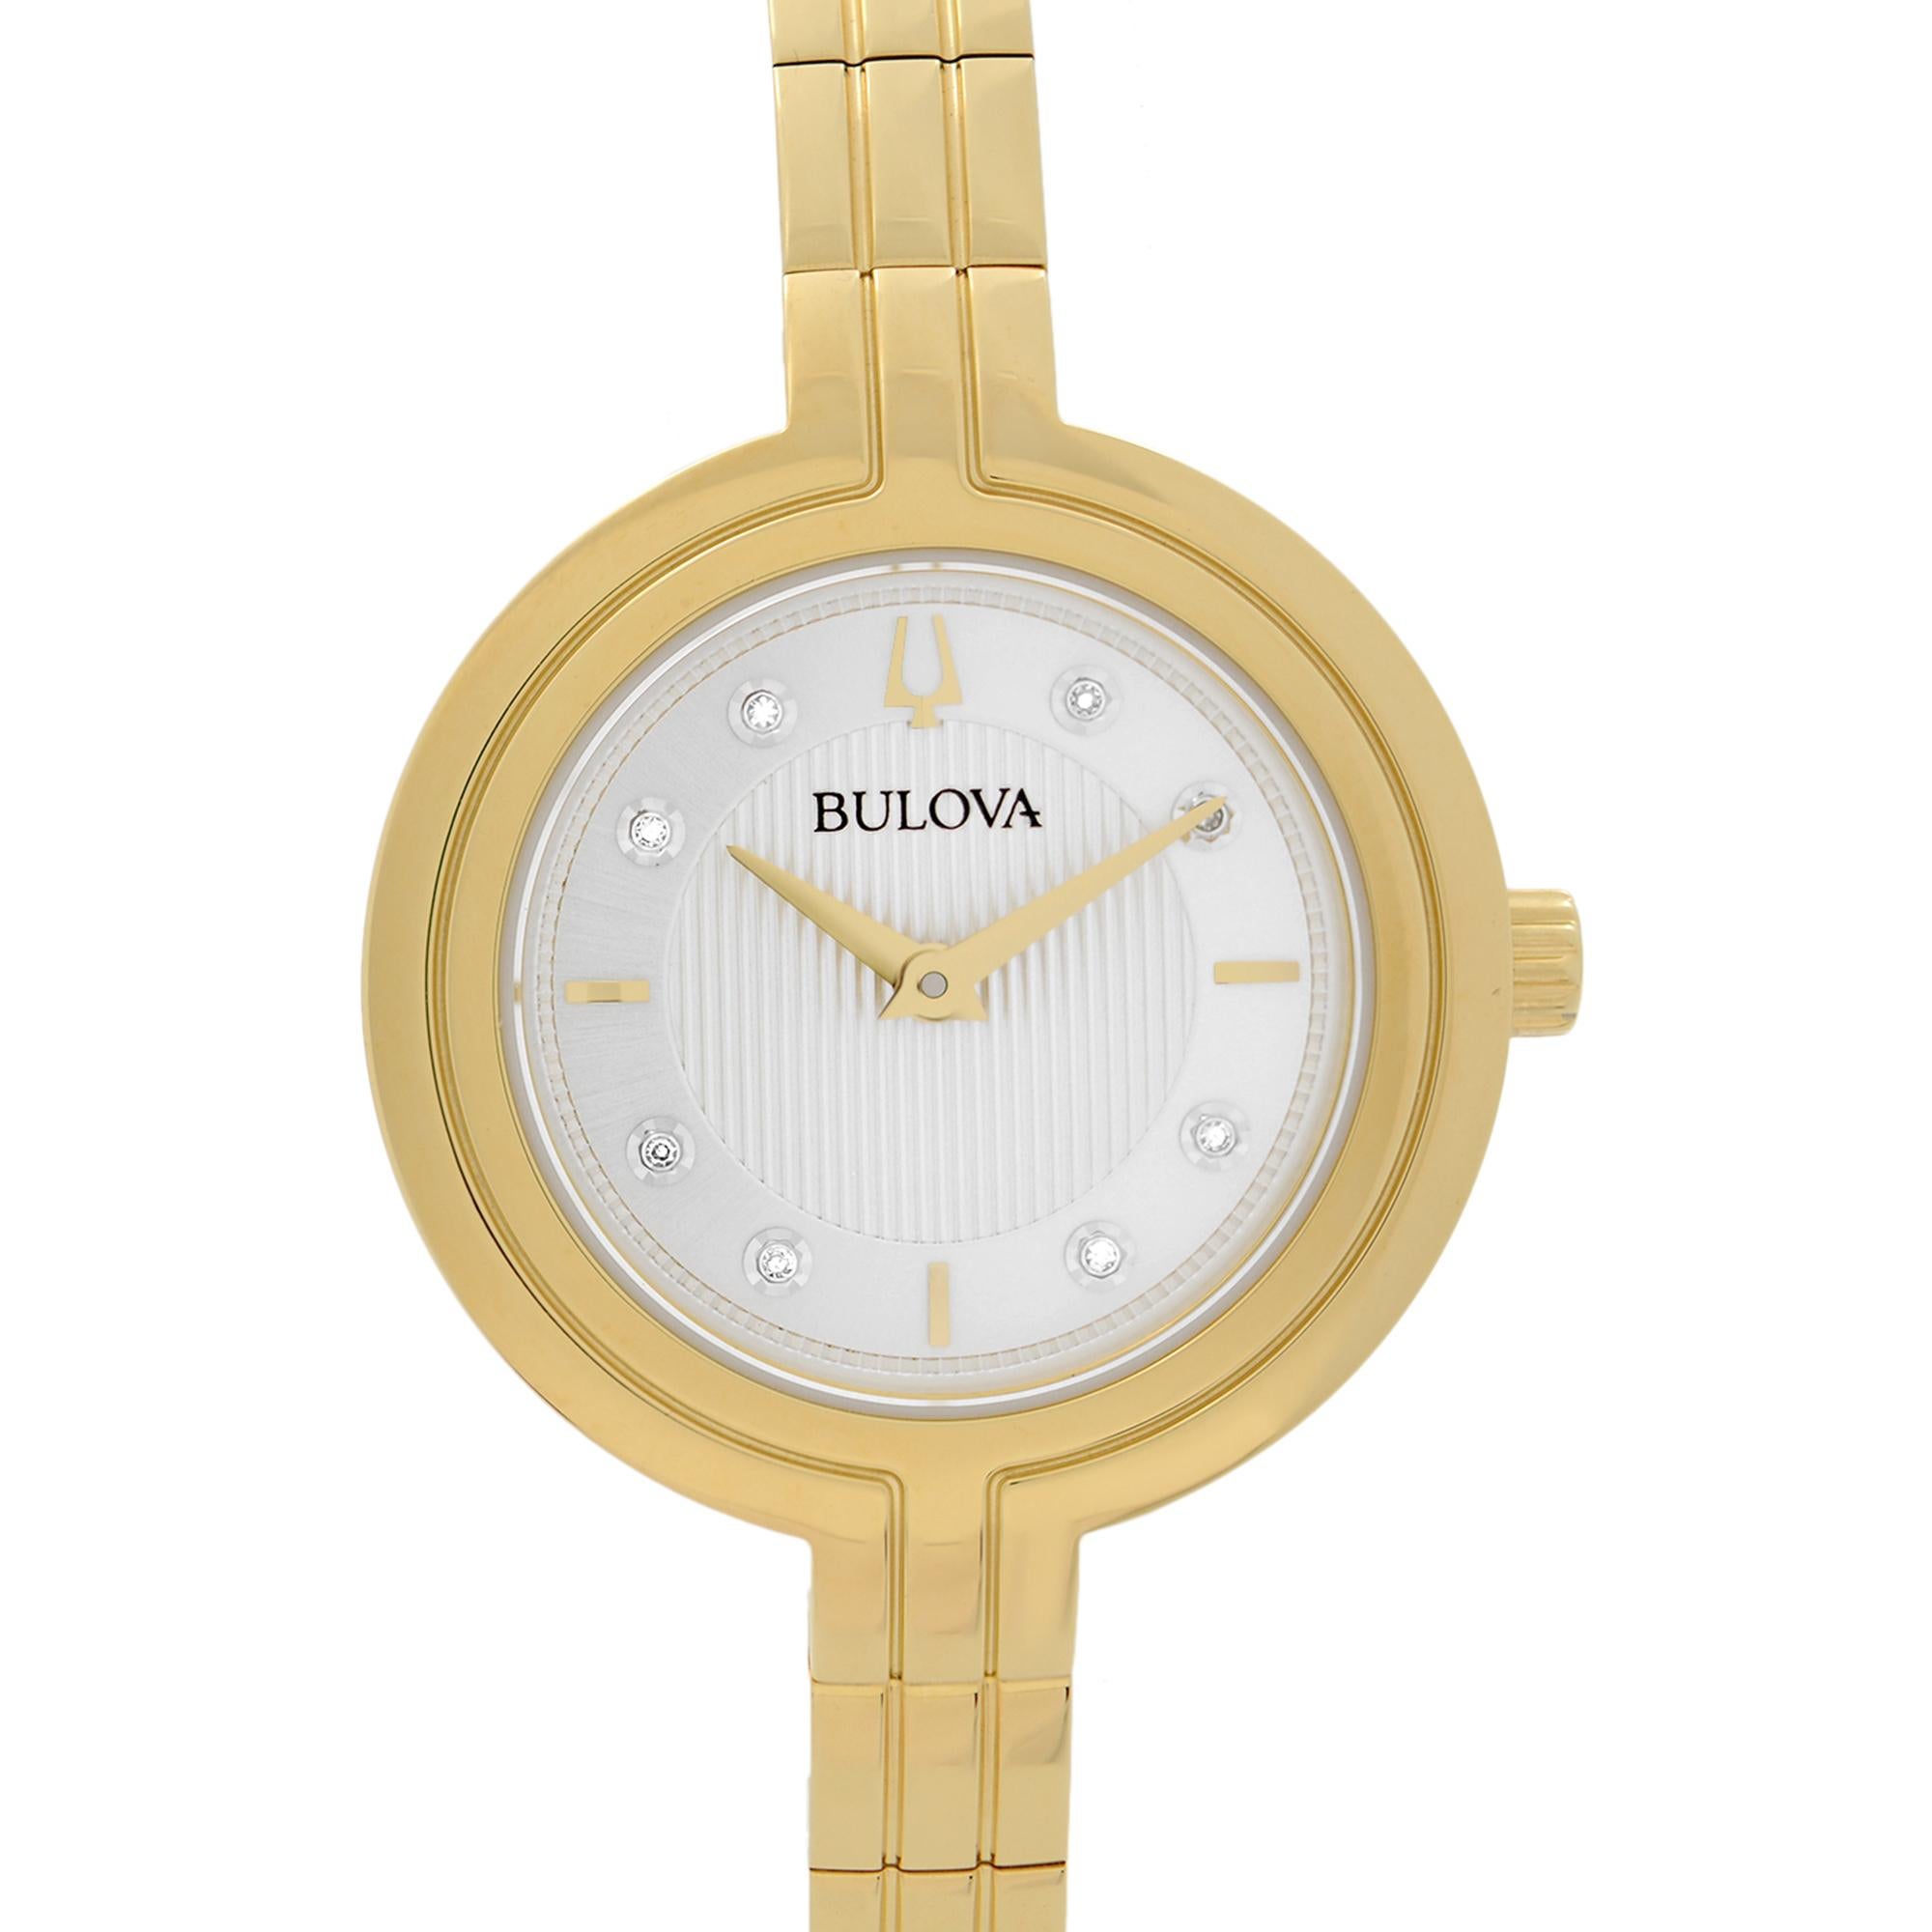 Display Model Bulova Rhapsody Quartz Watch 97P144. The Watch Might have Minor Blemishes from Storing. Original Box and Papers are Included. This Beautiful Timepiece is Powered by Quartz (Battery) Movement And Features: Round Gold-tone Stainless